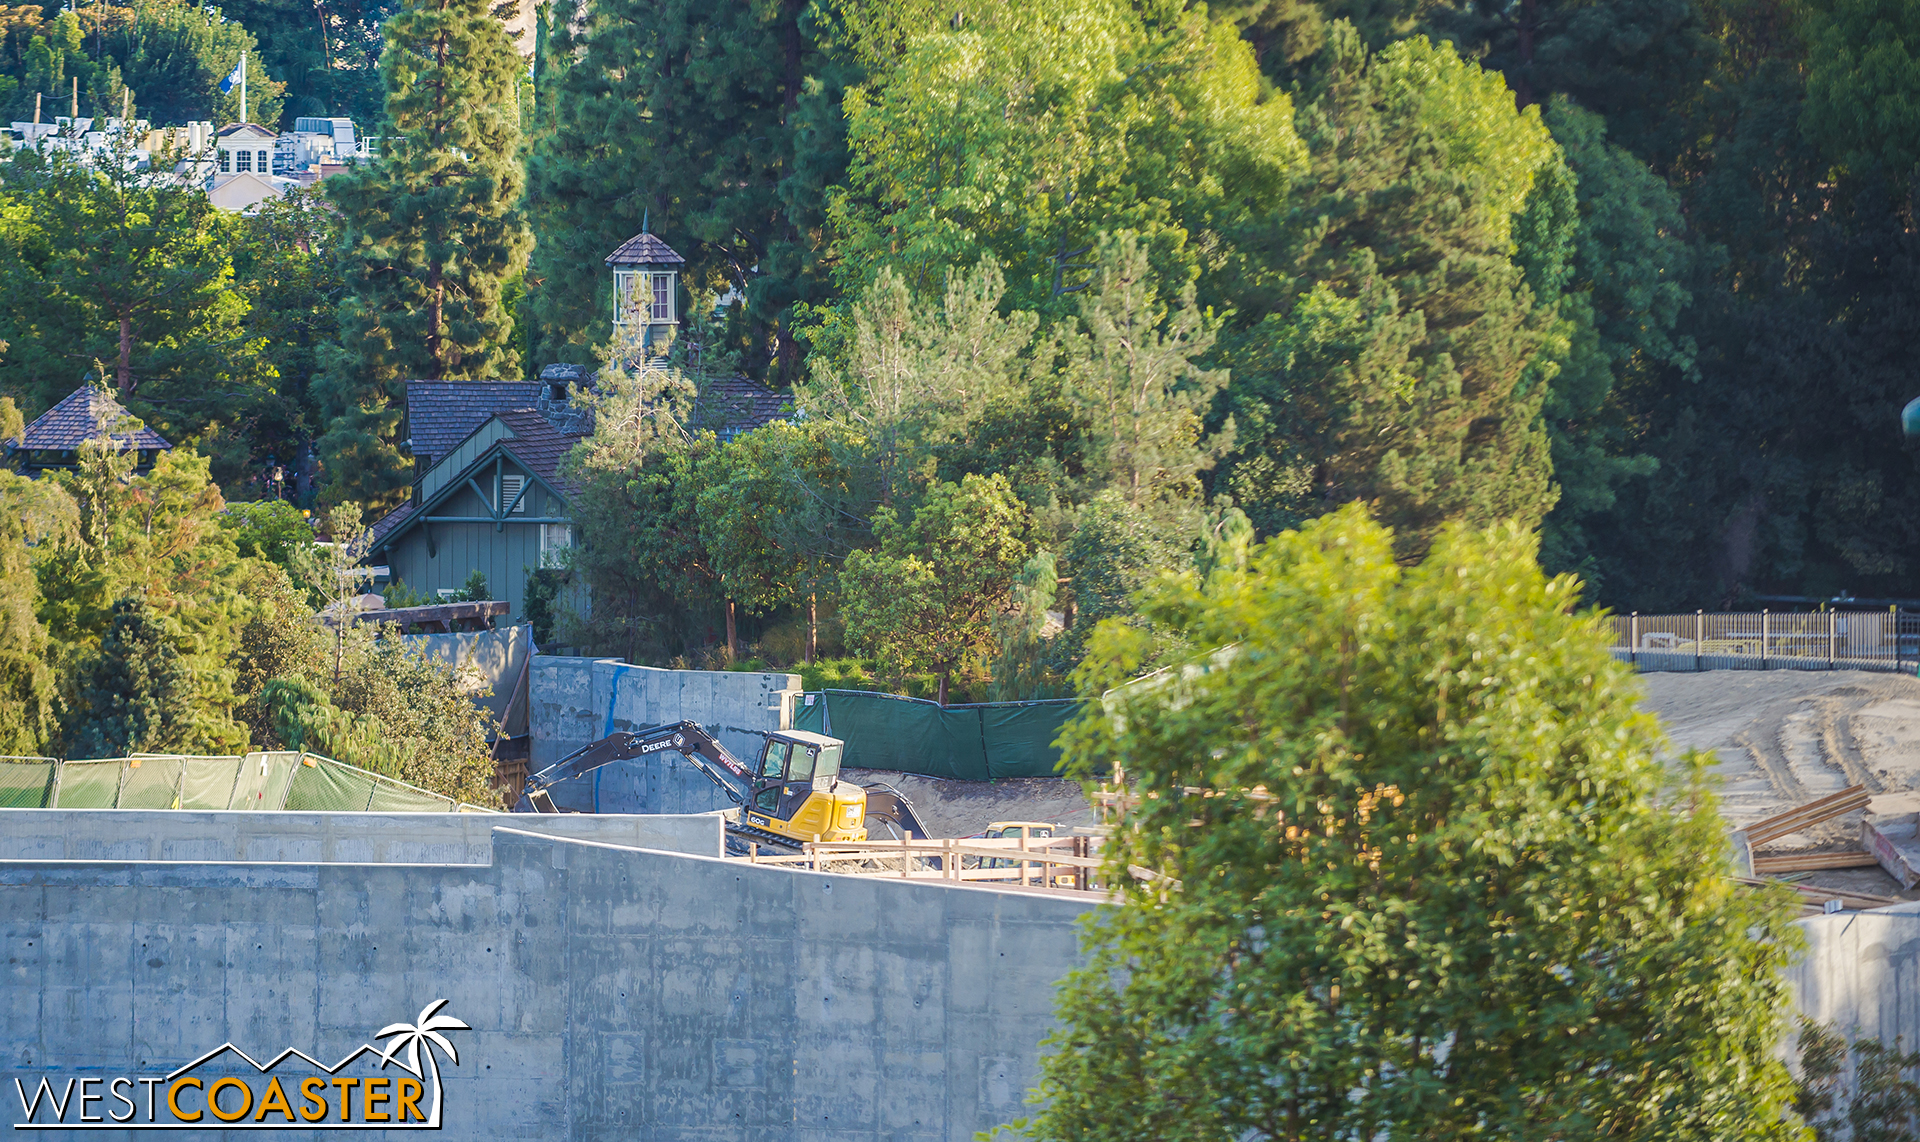  We can see some bit of earthwork at the Critter Country entrance.&nbsp; Some new concrete forms being laid down. 